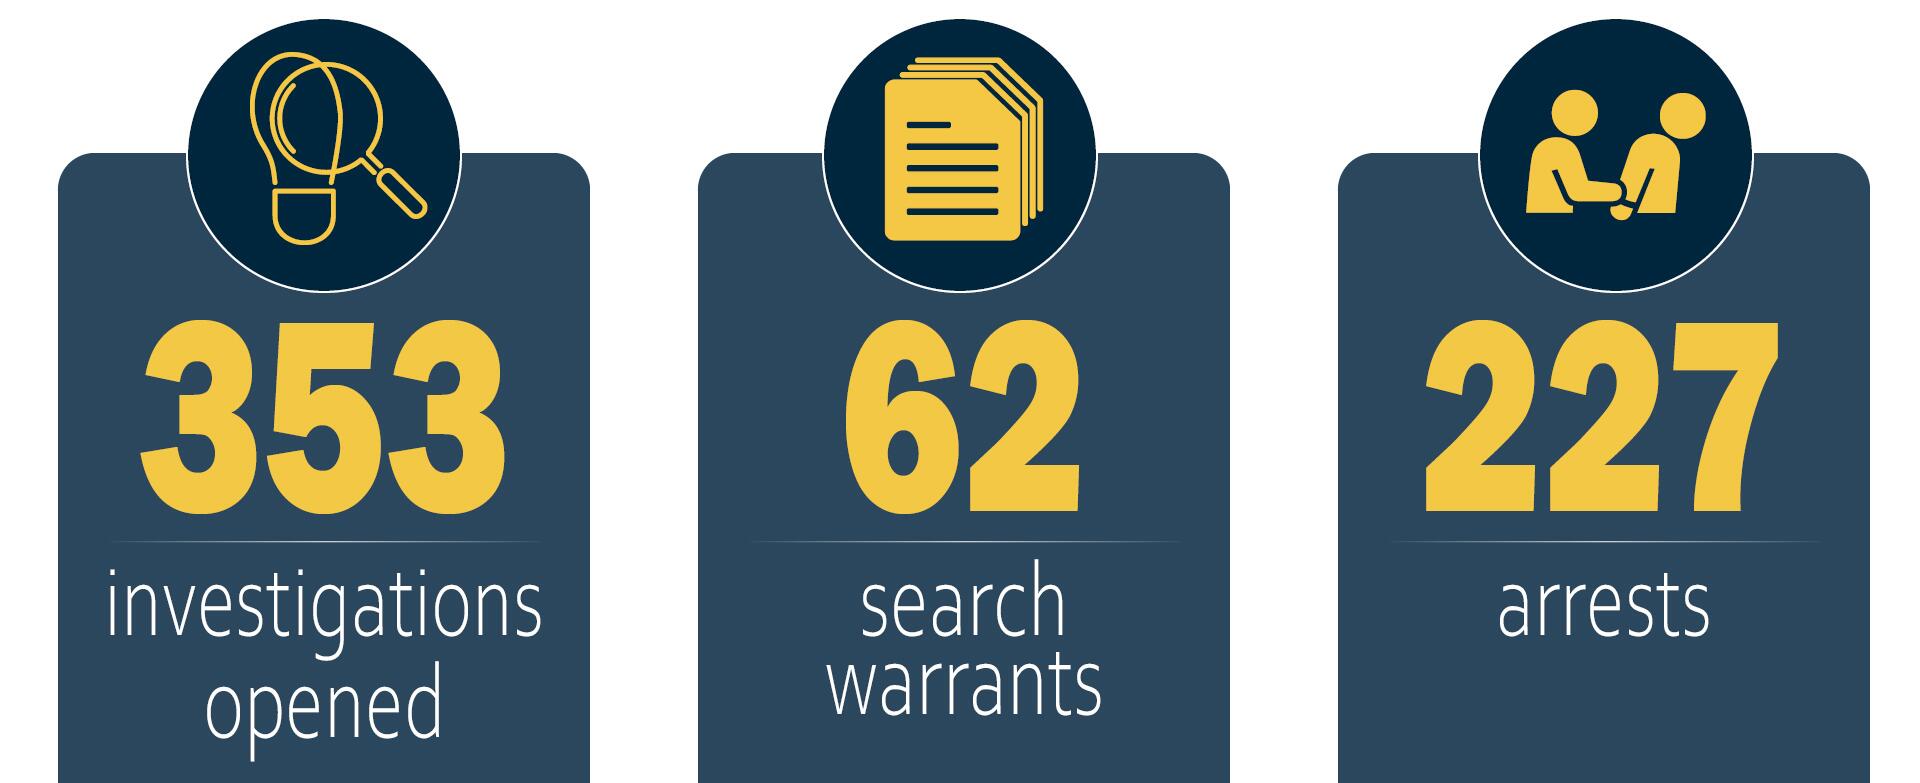 Operation Without a Trace: Results During FY 2020 - 353 investigations opened; 62 search warrants; 227 arrests